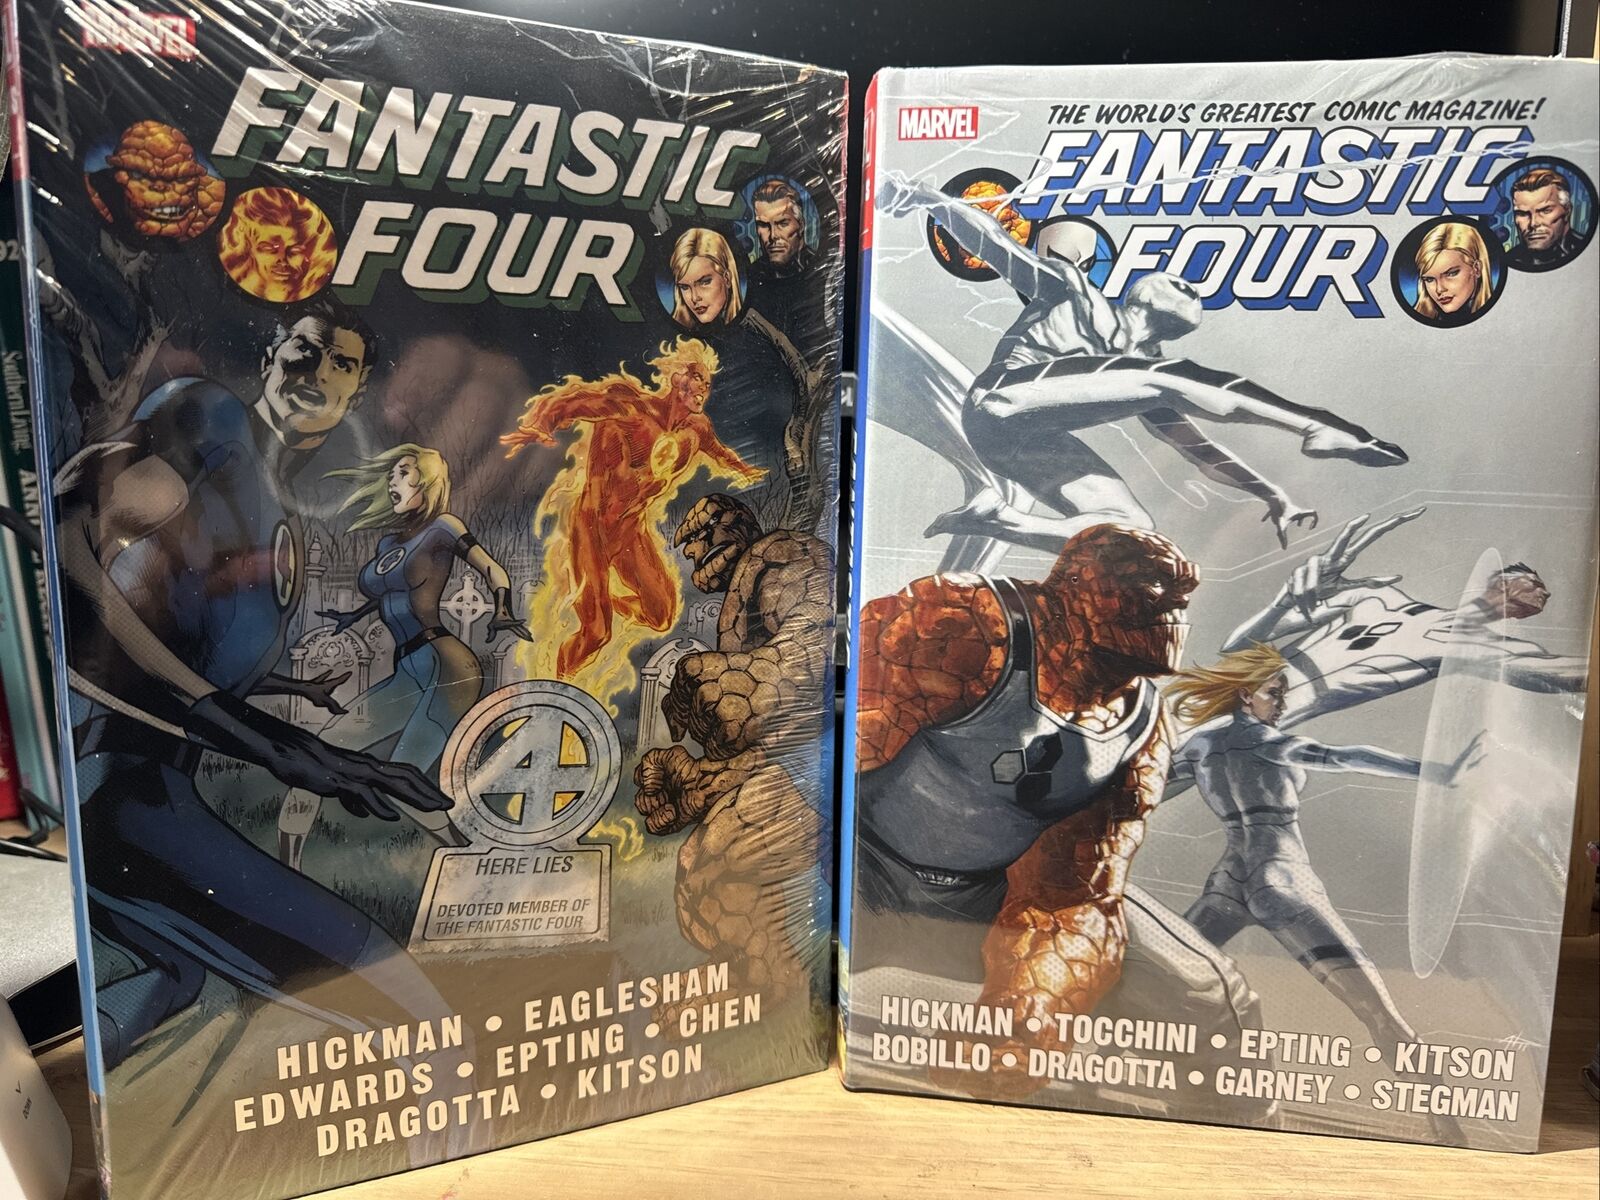 Fantastic Four by Jonathan Hickman Omnibus Hardcover Vol 1 & 2 HC NEW / SEALED